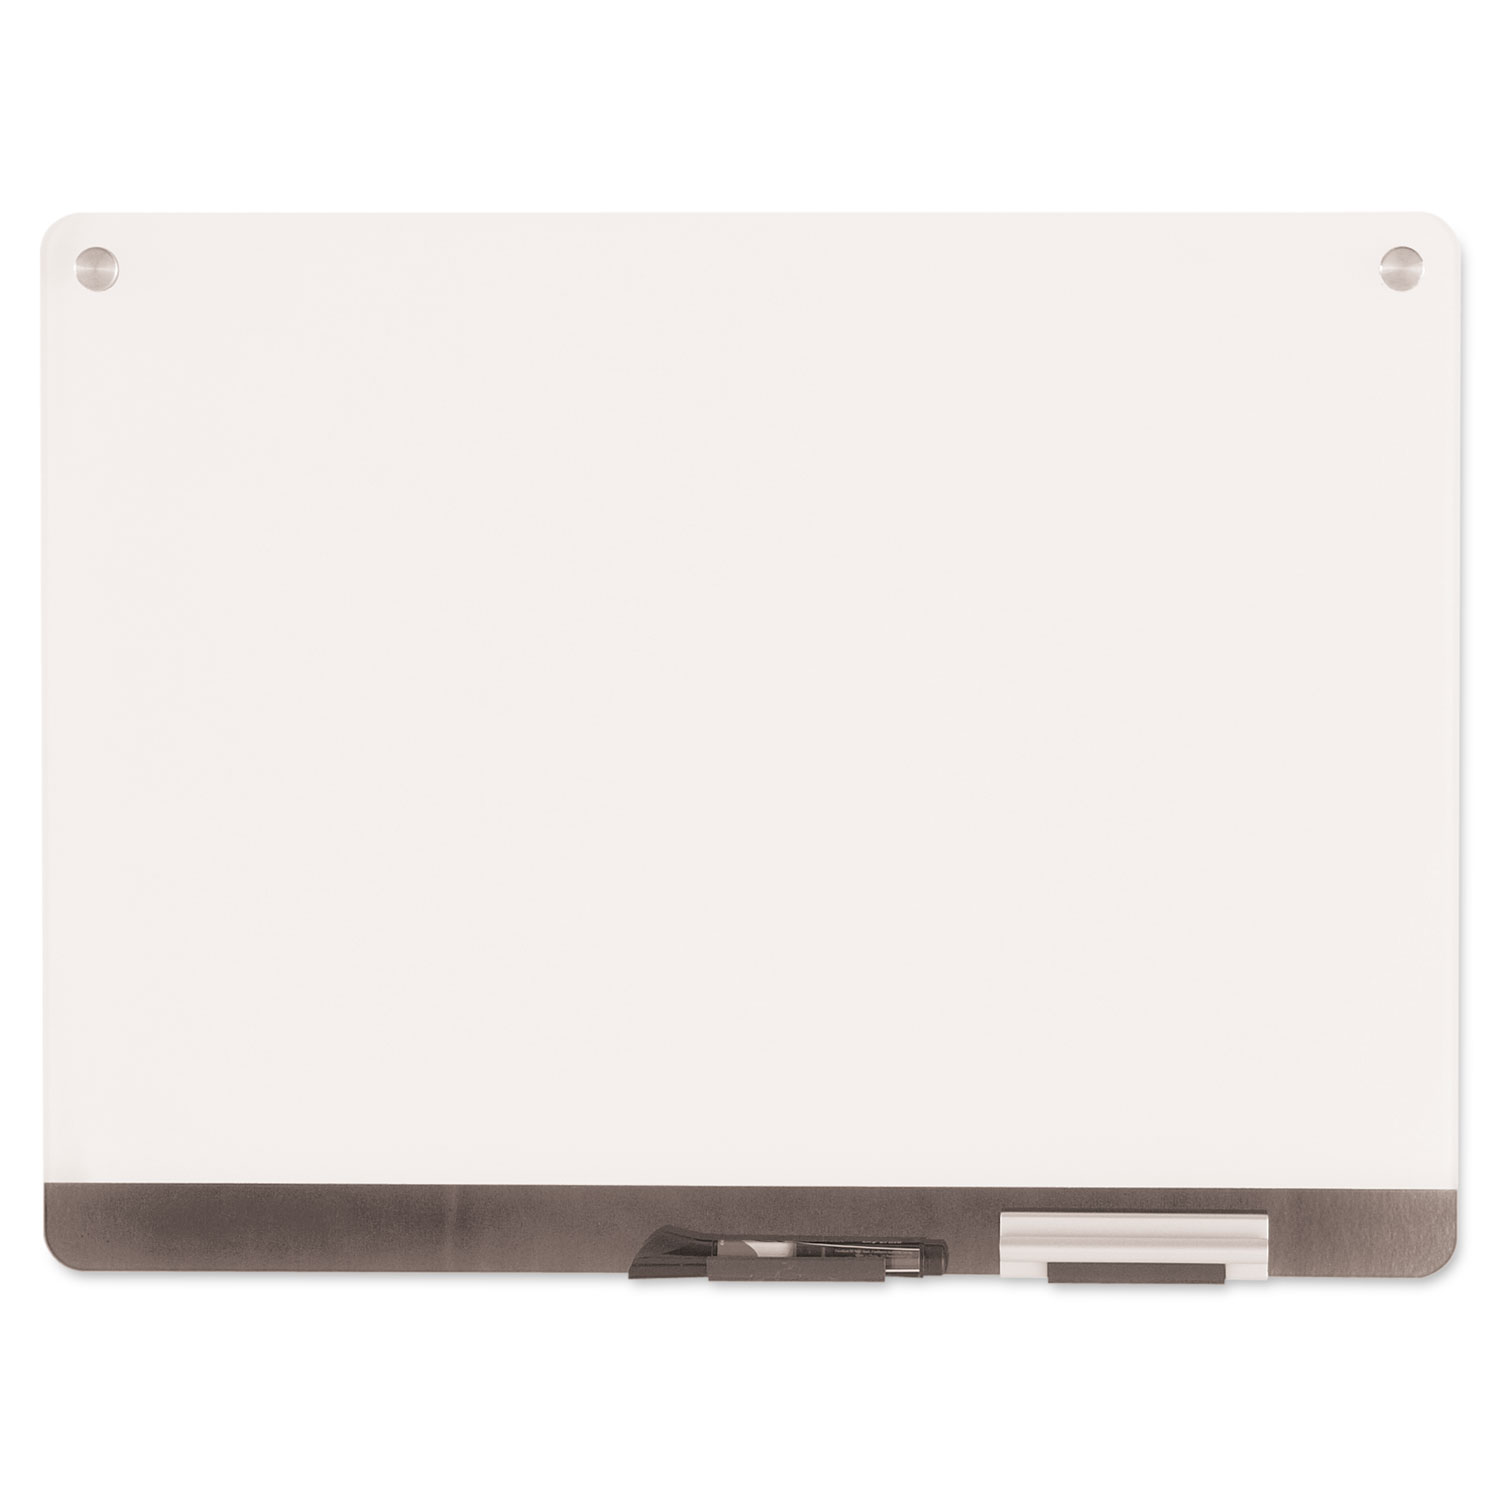  Iceberg 31170 Clarity Glass Personal Dry Erase Boards, Ultra-White Backing, 24 x 18 (ICE31170) 